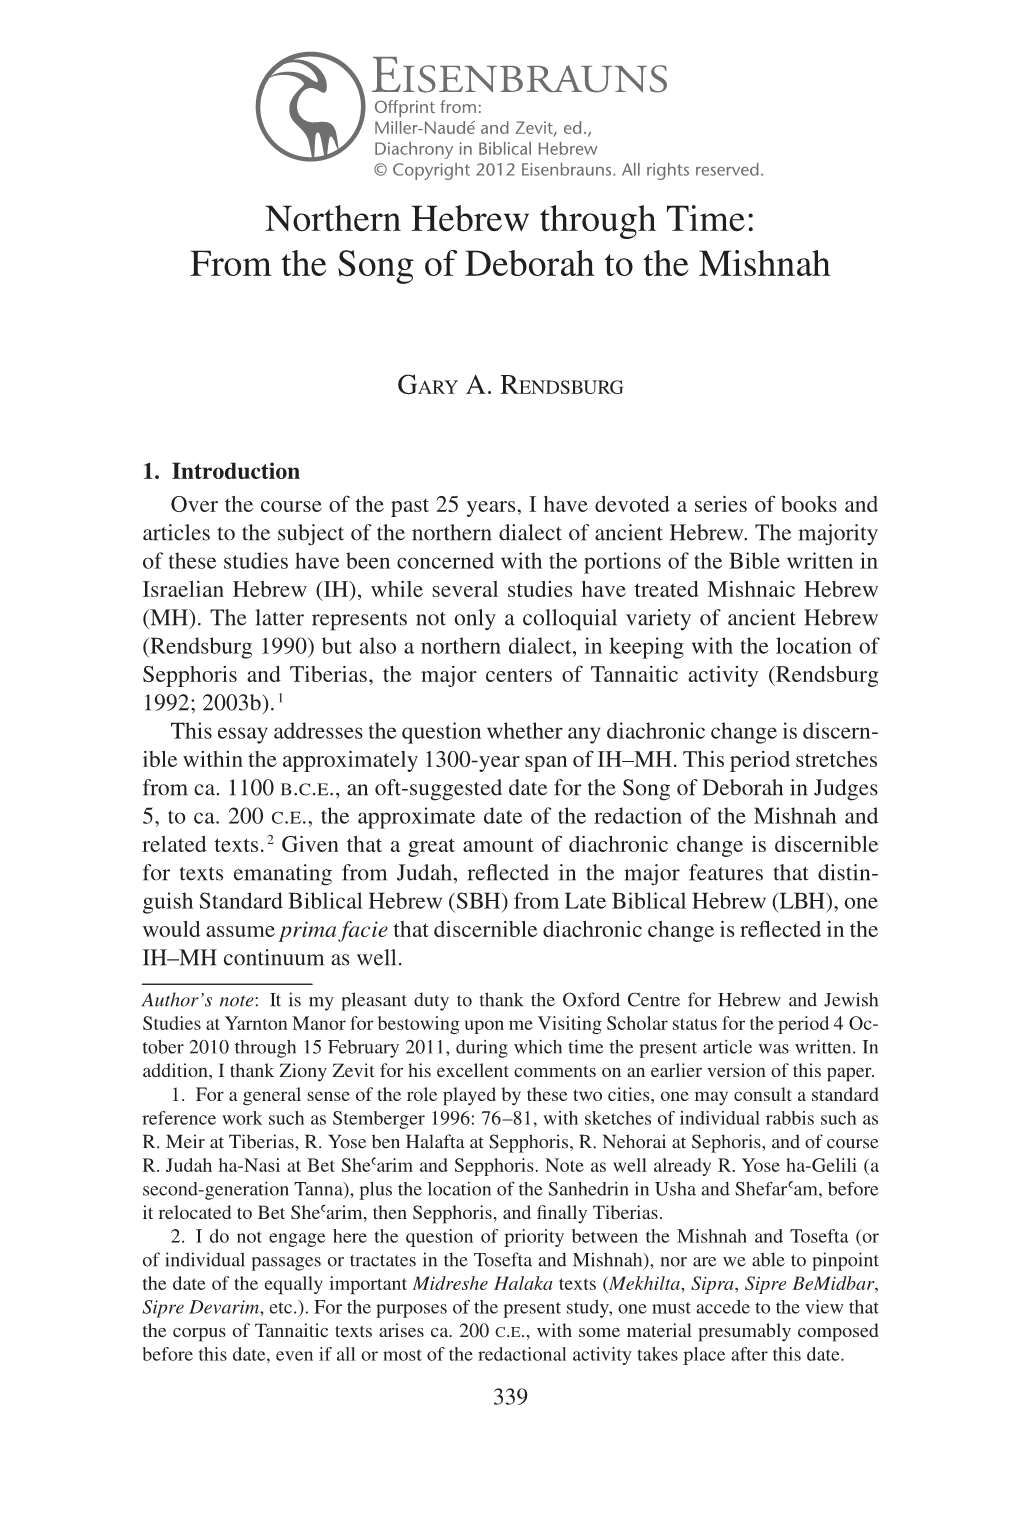 Northern Hebrew Through Time: from the Song of Deborah to the Mishnah